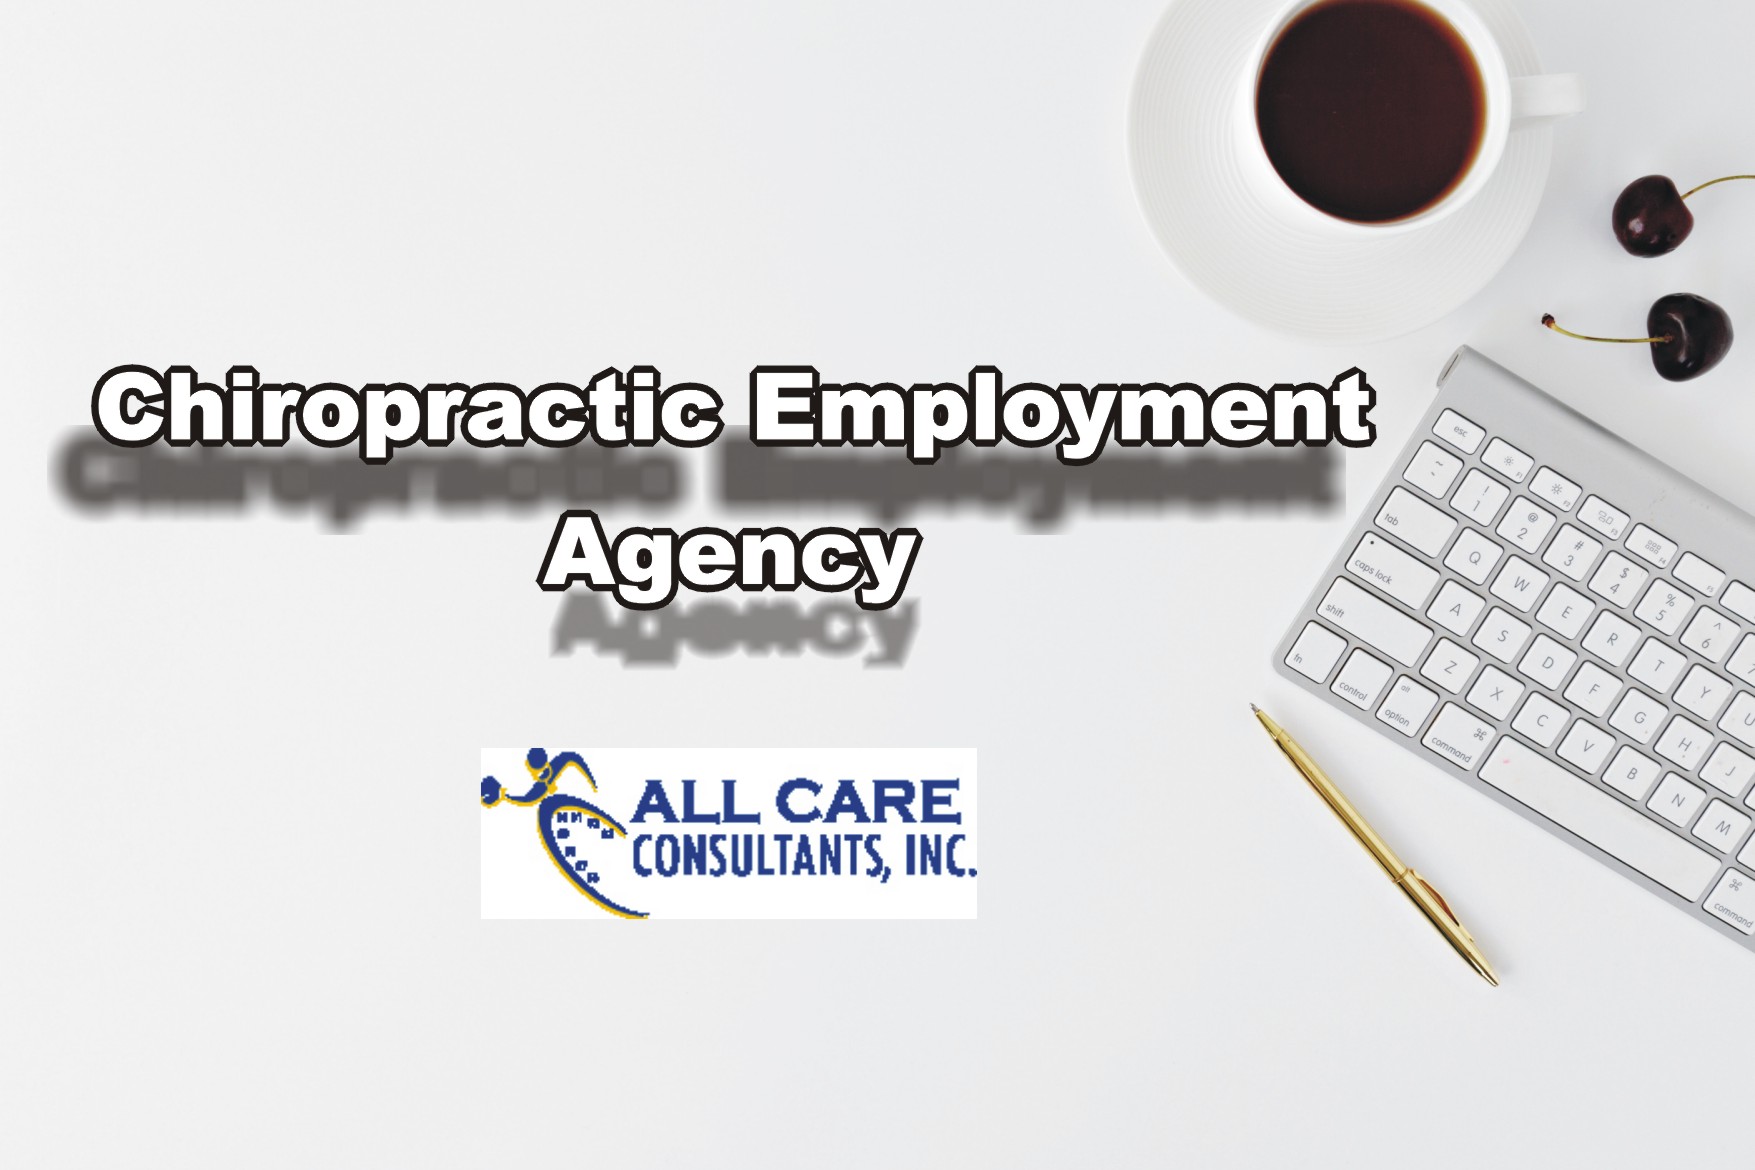 Chiropractic employment agency in Florida - Medical Jobs